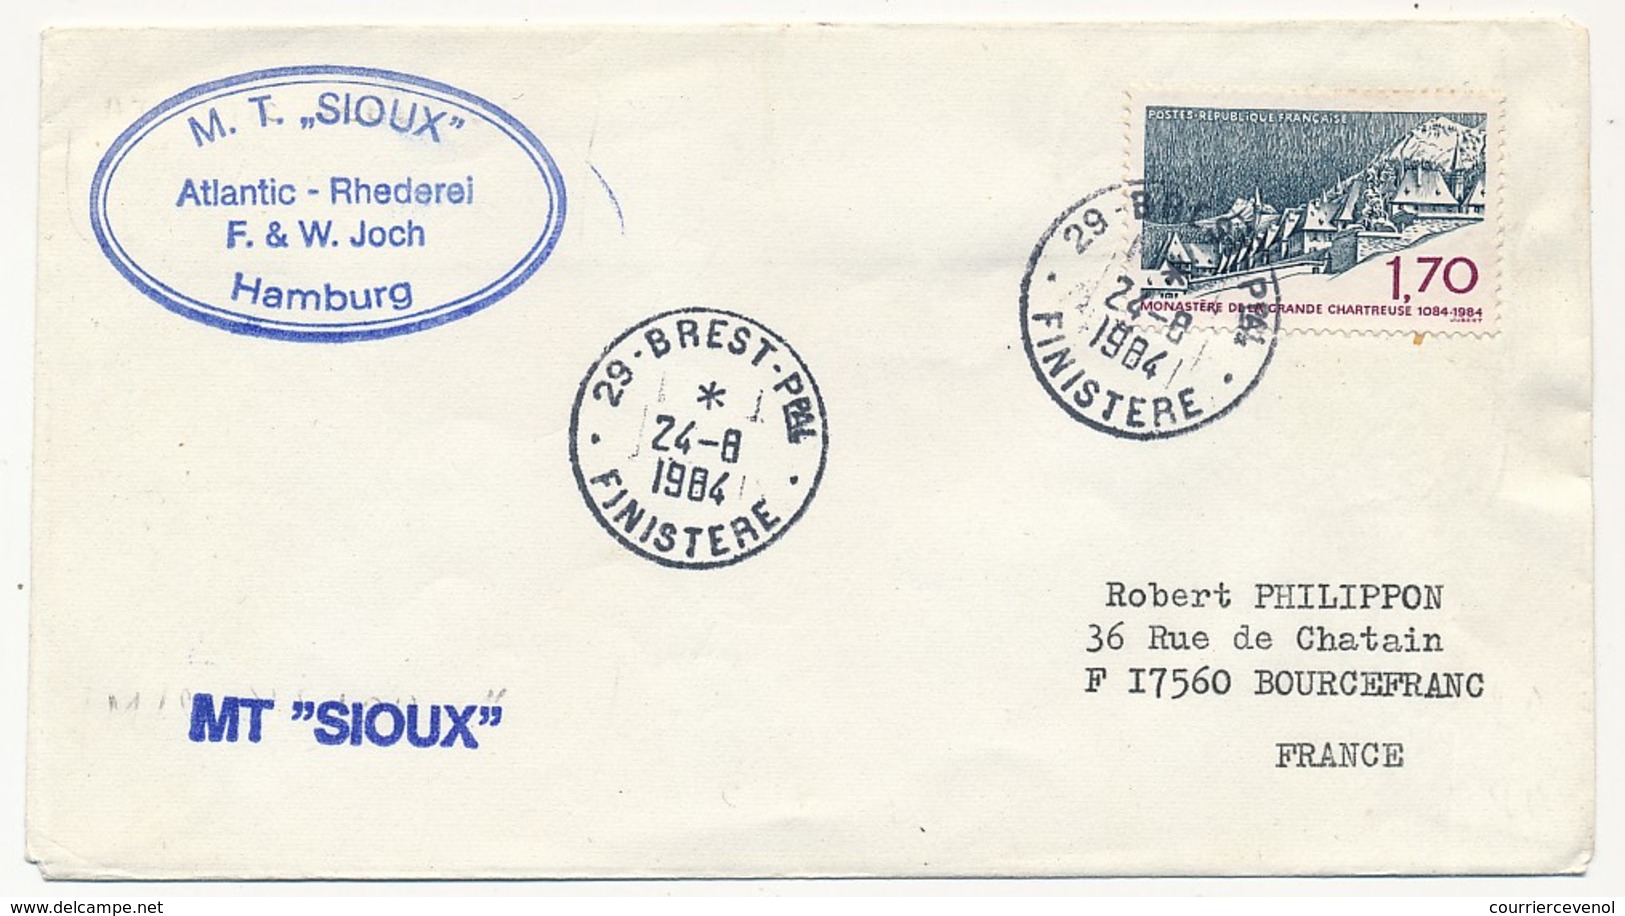 FRANCE - 1,70 Grande Chartreuse Obl 29 Brest Ppal 1984 + M.T. SIOUX Hambourg - Poste Maritime